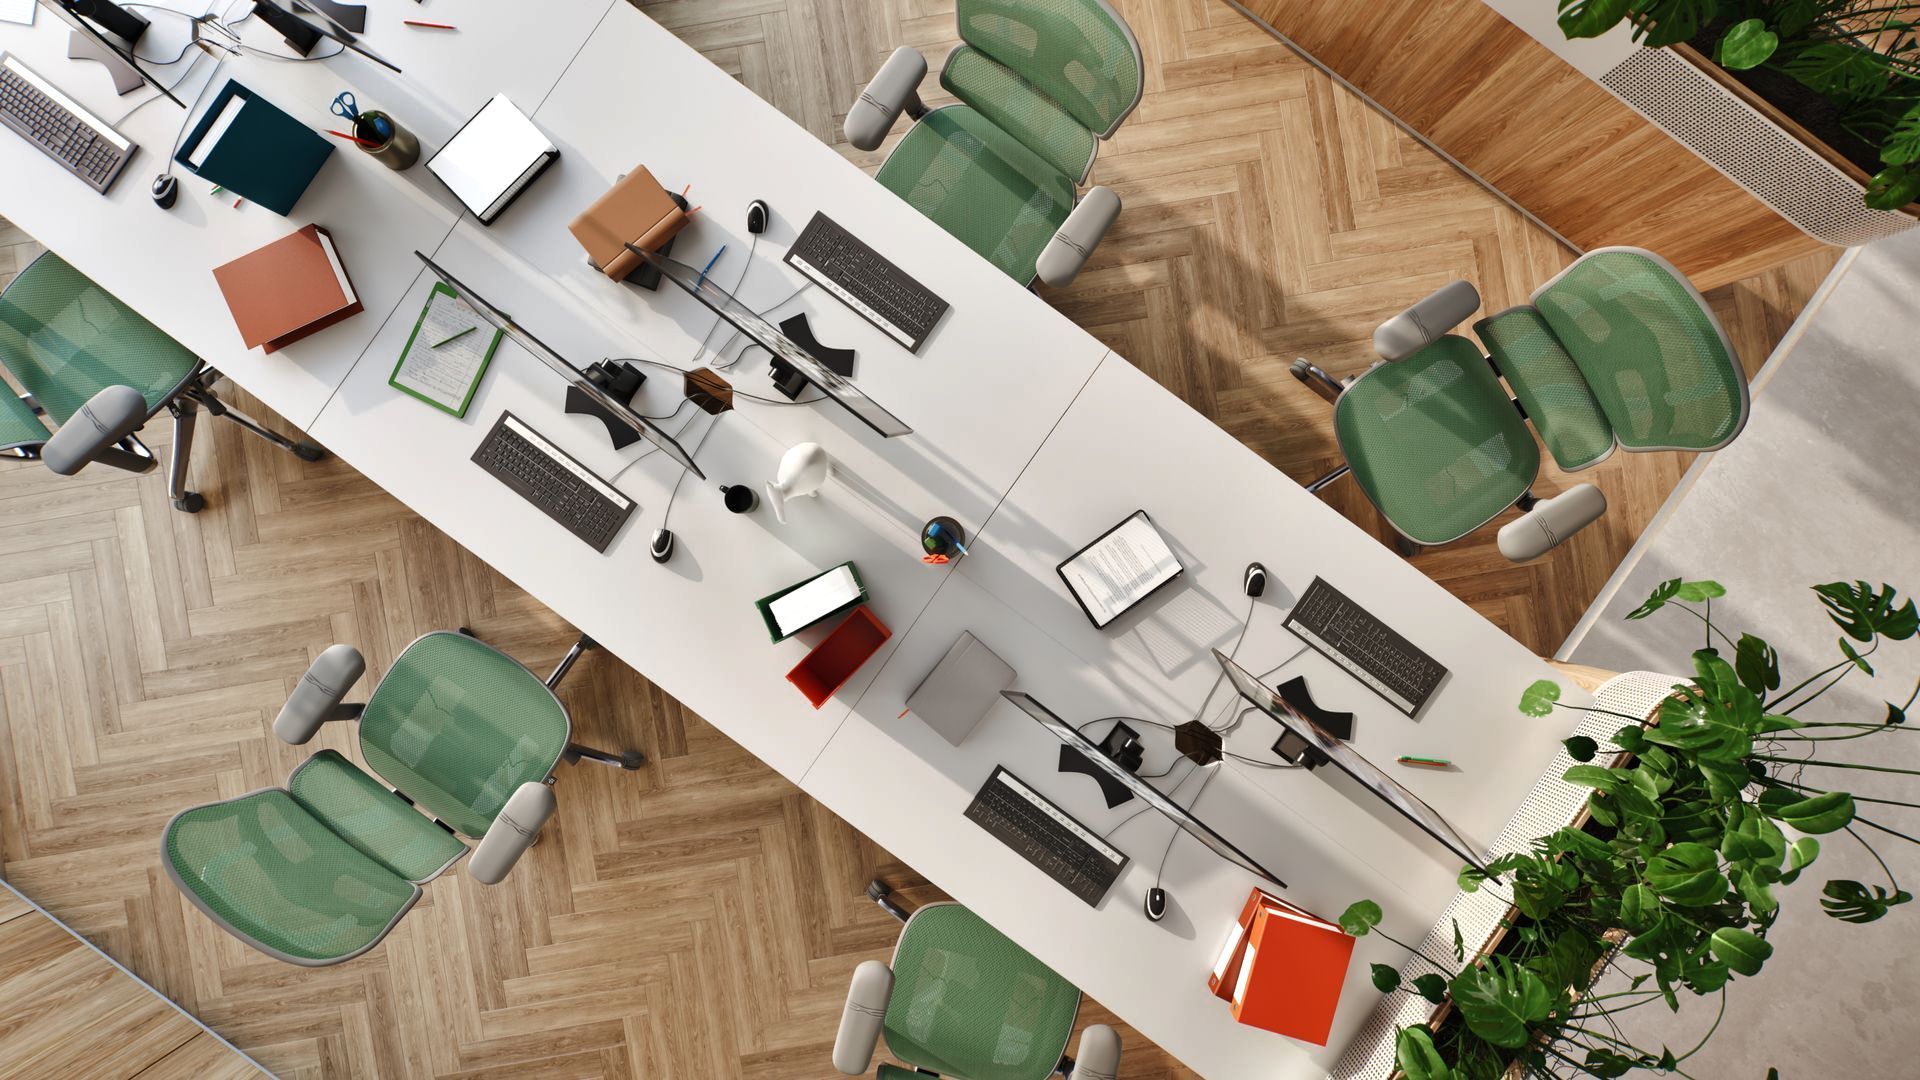 Plan view of Ergohuman Elite ergonomic office chairs in grey frame with green mesh around a white desk table. The floor is herringbone wood. There are planters in the background